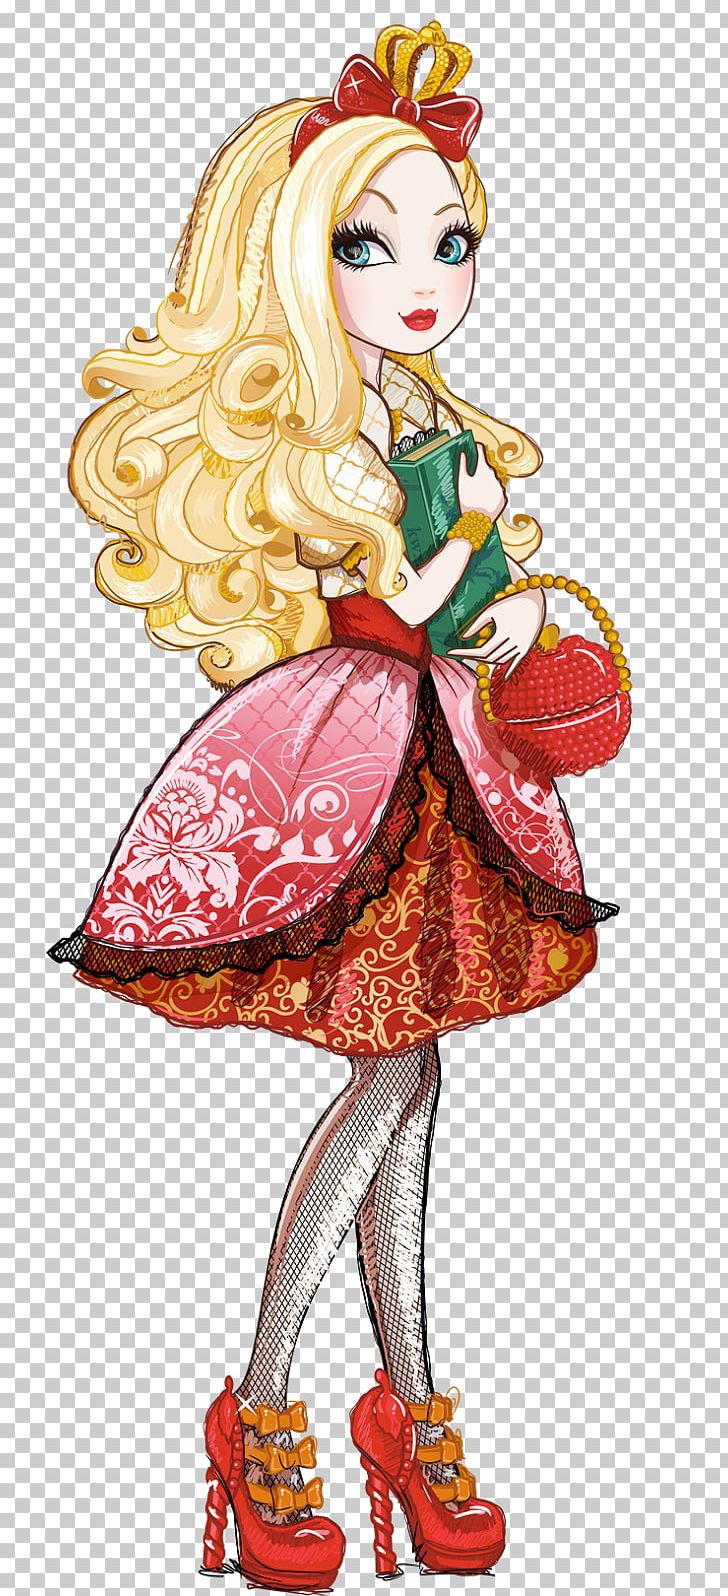 Ever After High Snow White Apple Doll PNG, Clipart, Apple, Apple Doll, Art, Costume, Costume Design Free PNG Download